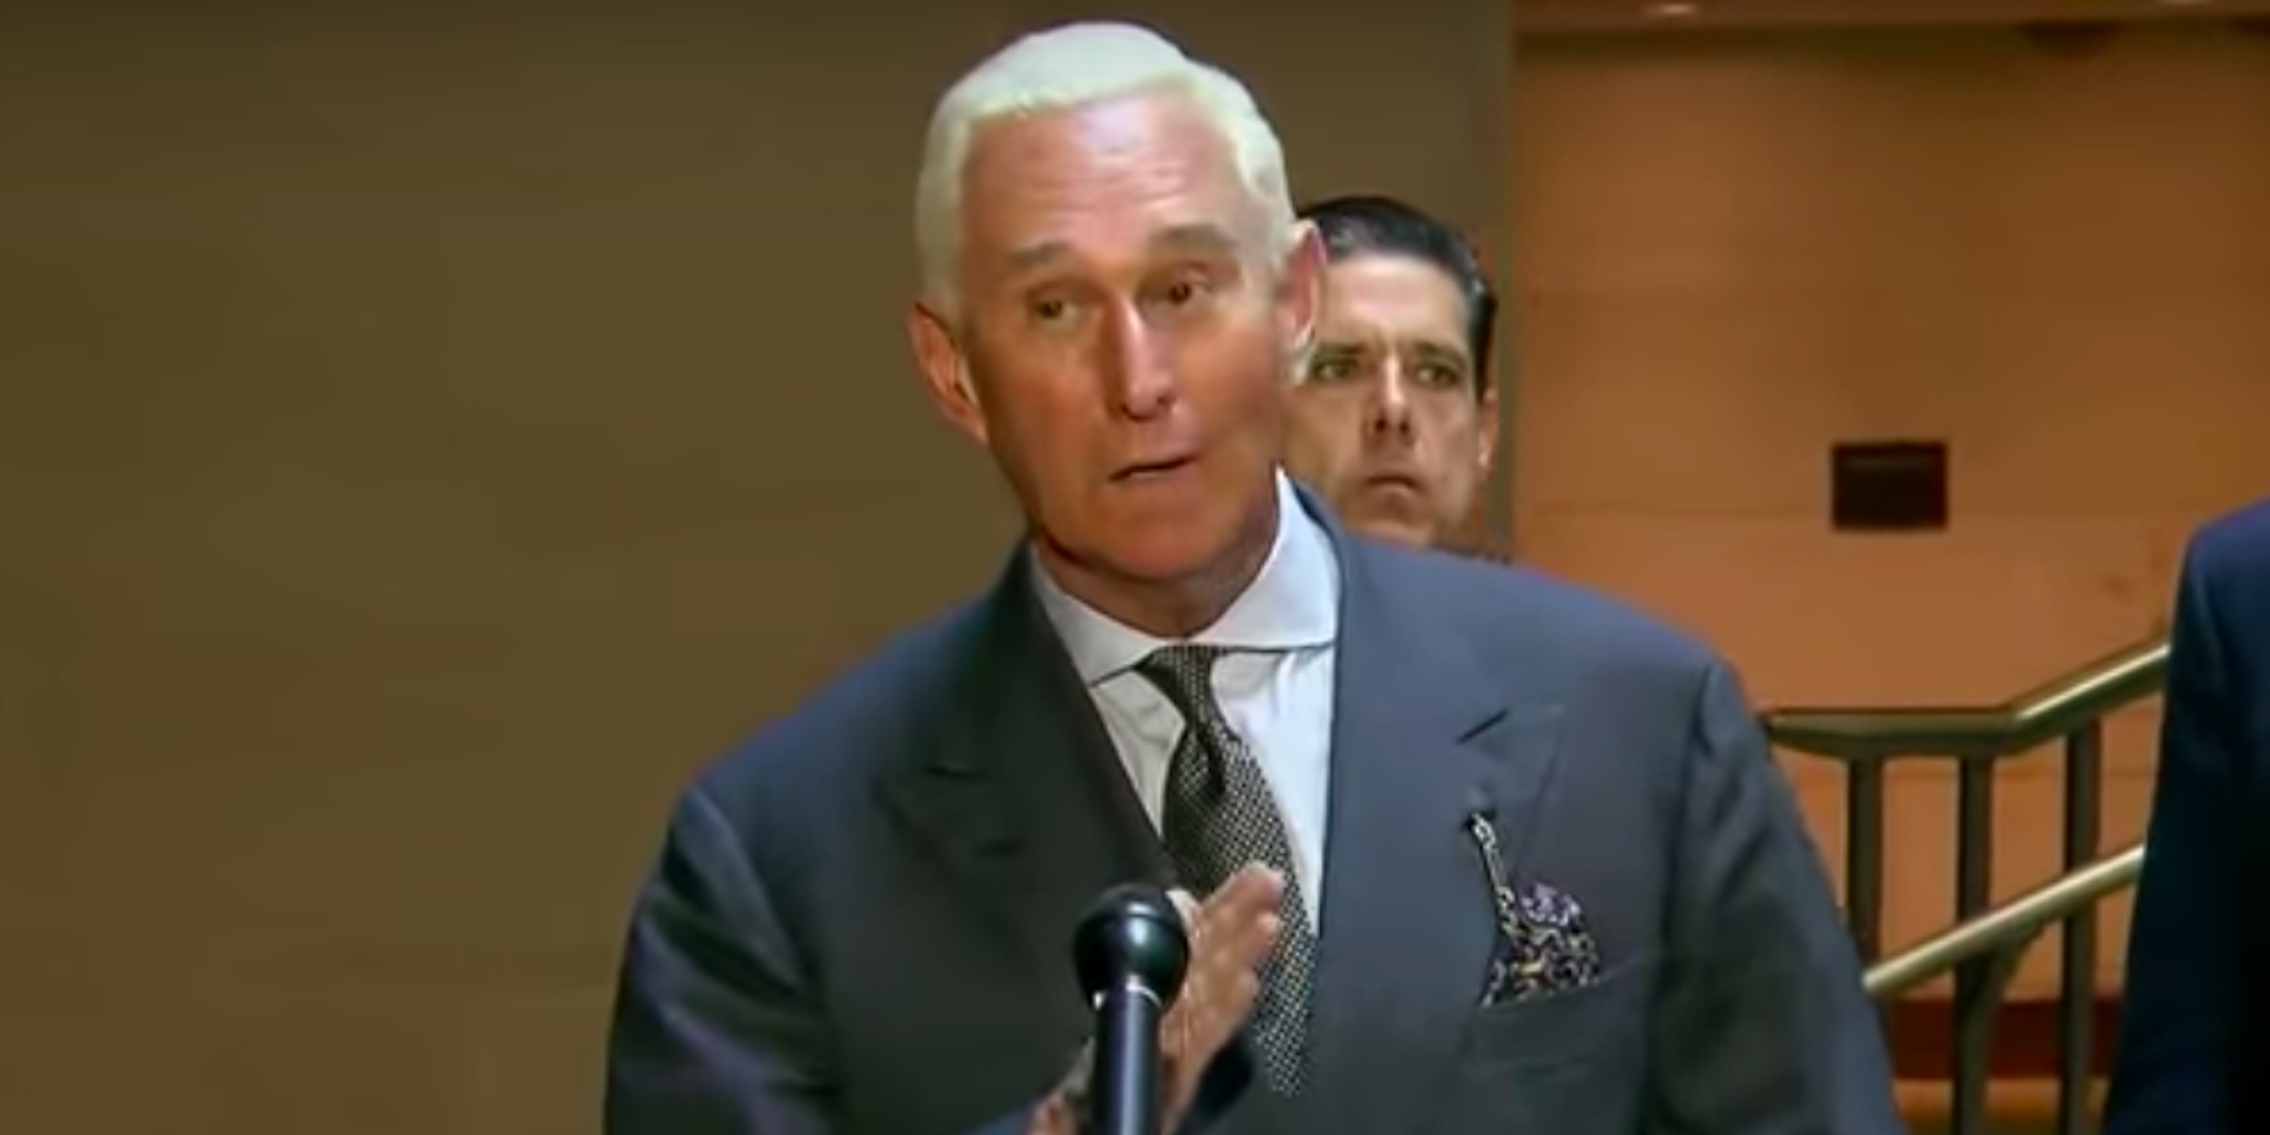 roger stone conspiracy theory arrest CNN